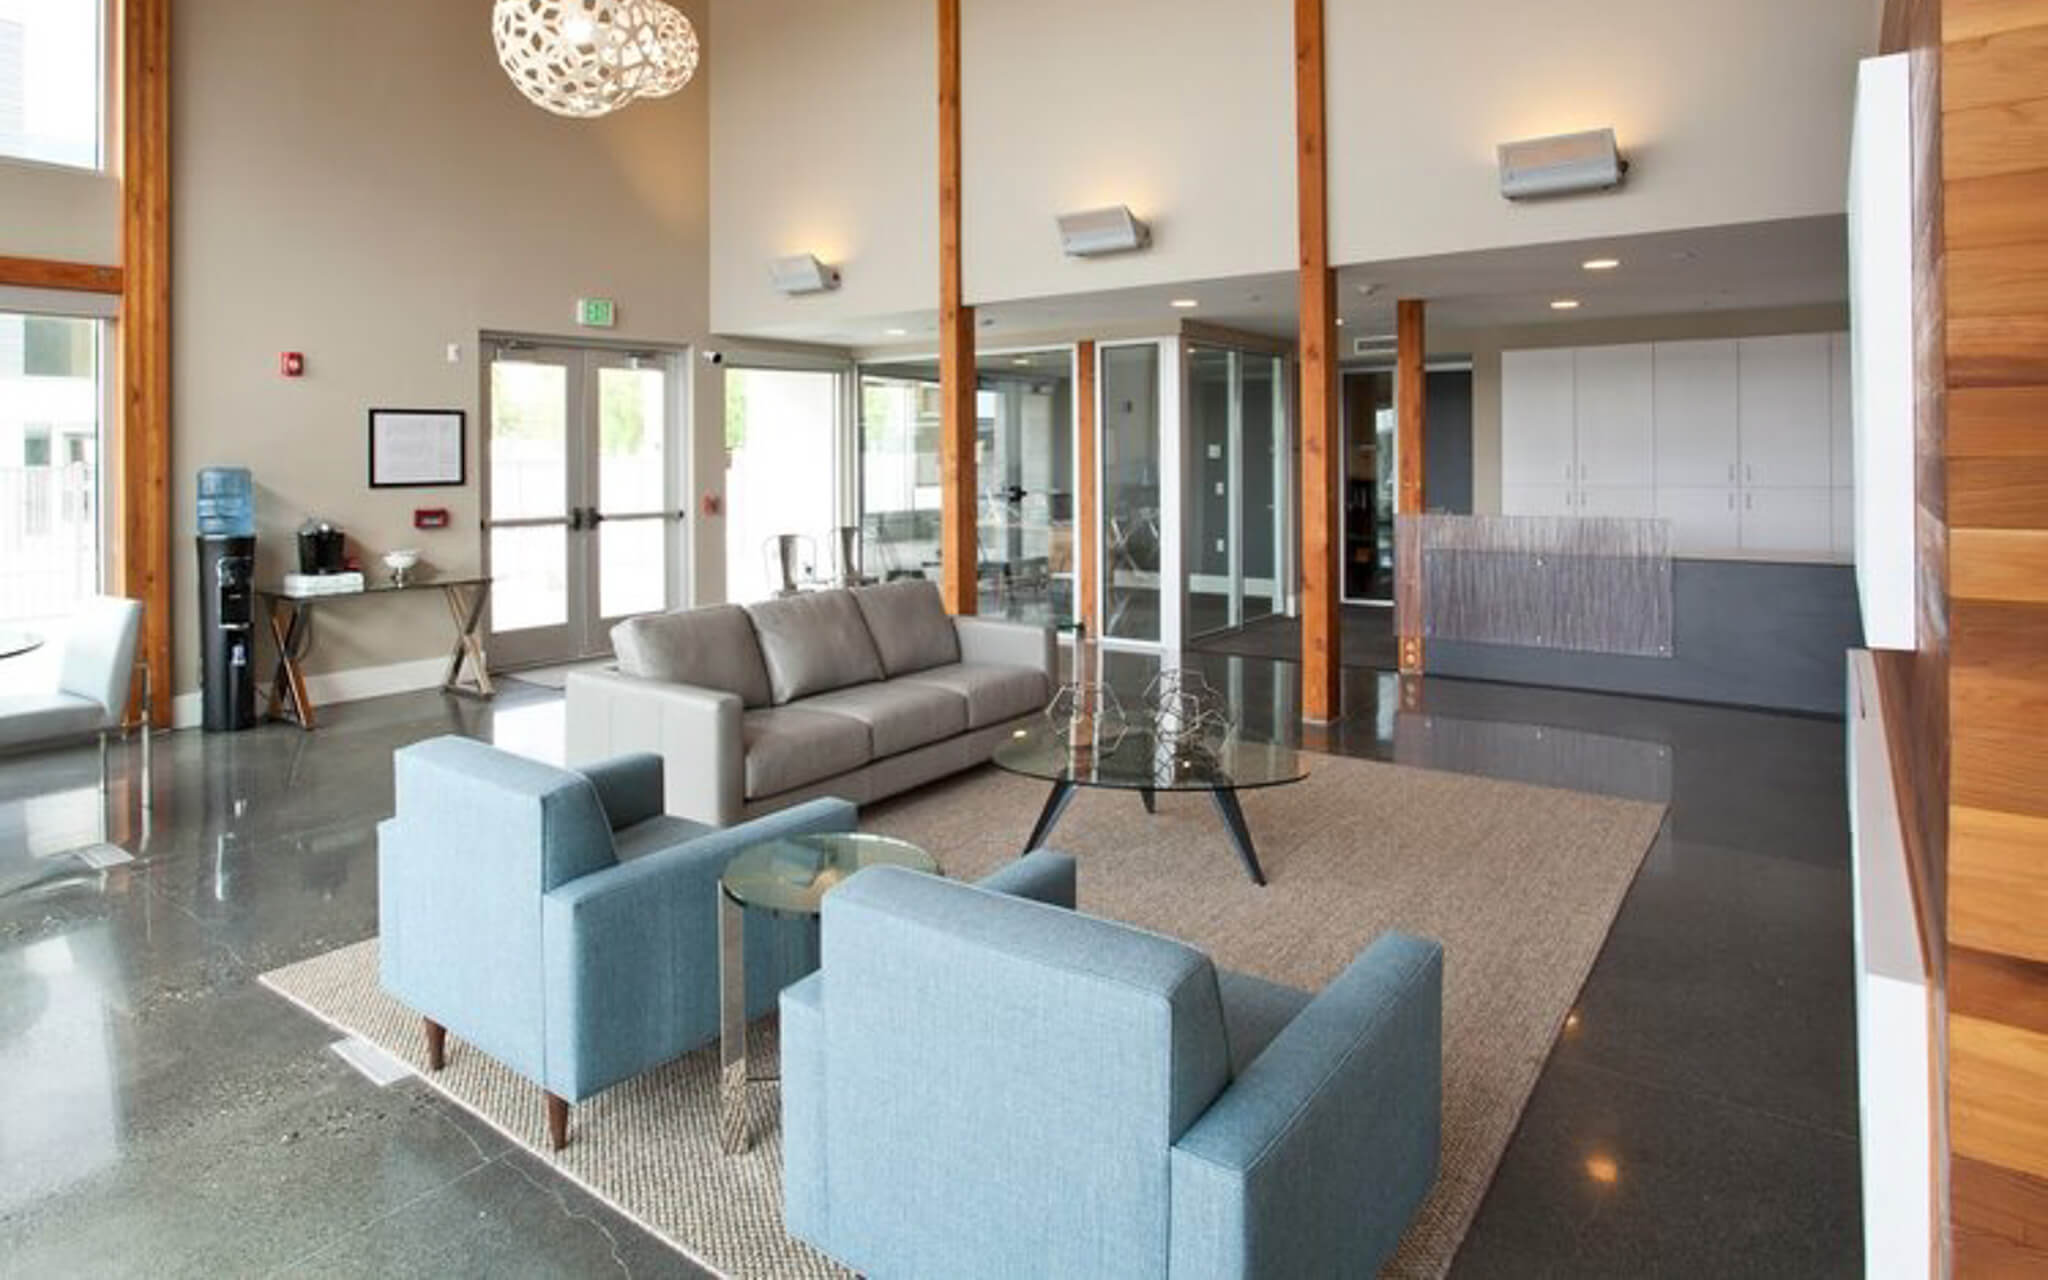 Paragon Corporate Housing - The Commons at Innovation Center Apartments - Richland Washington